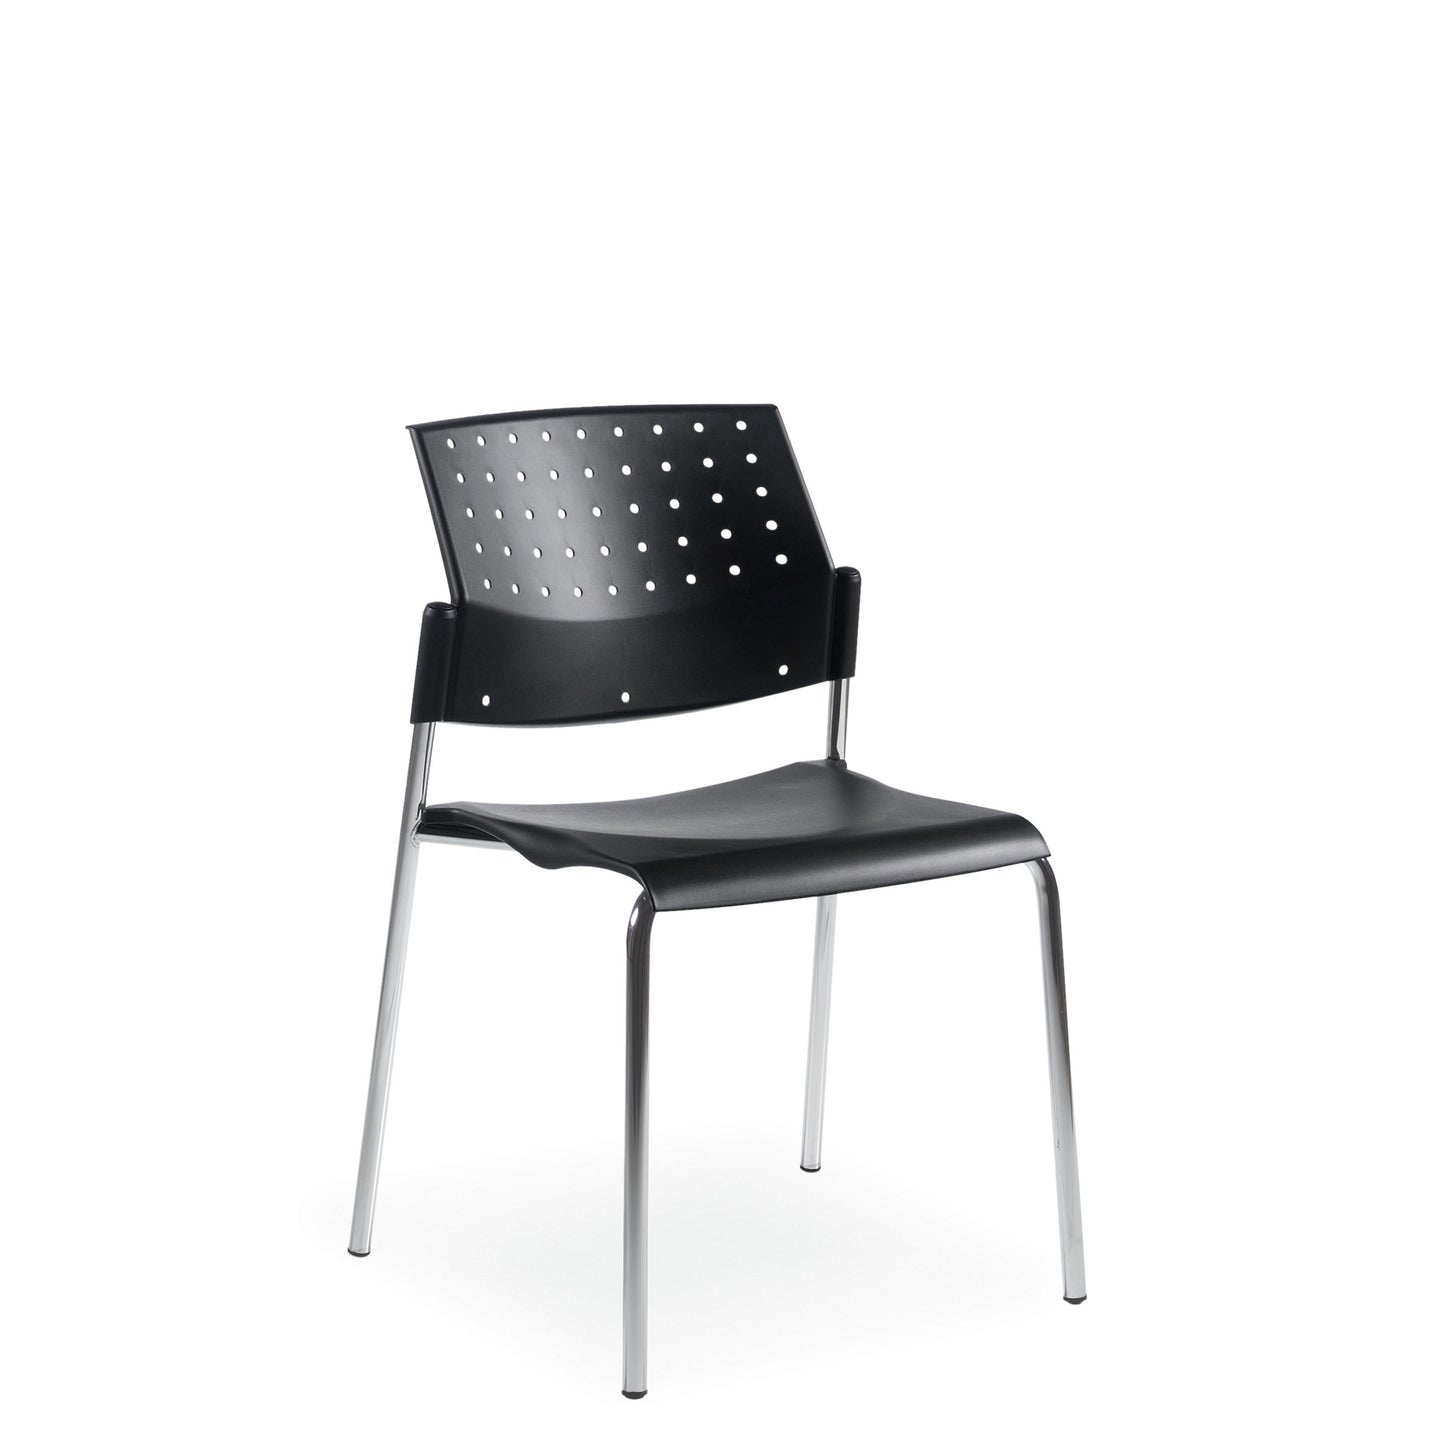 Global Sonic Armless Stacking Chair, Polypropylene Seat & Back 6508